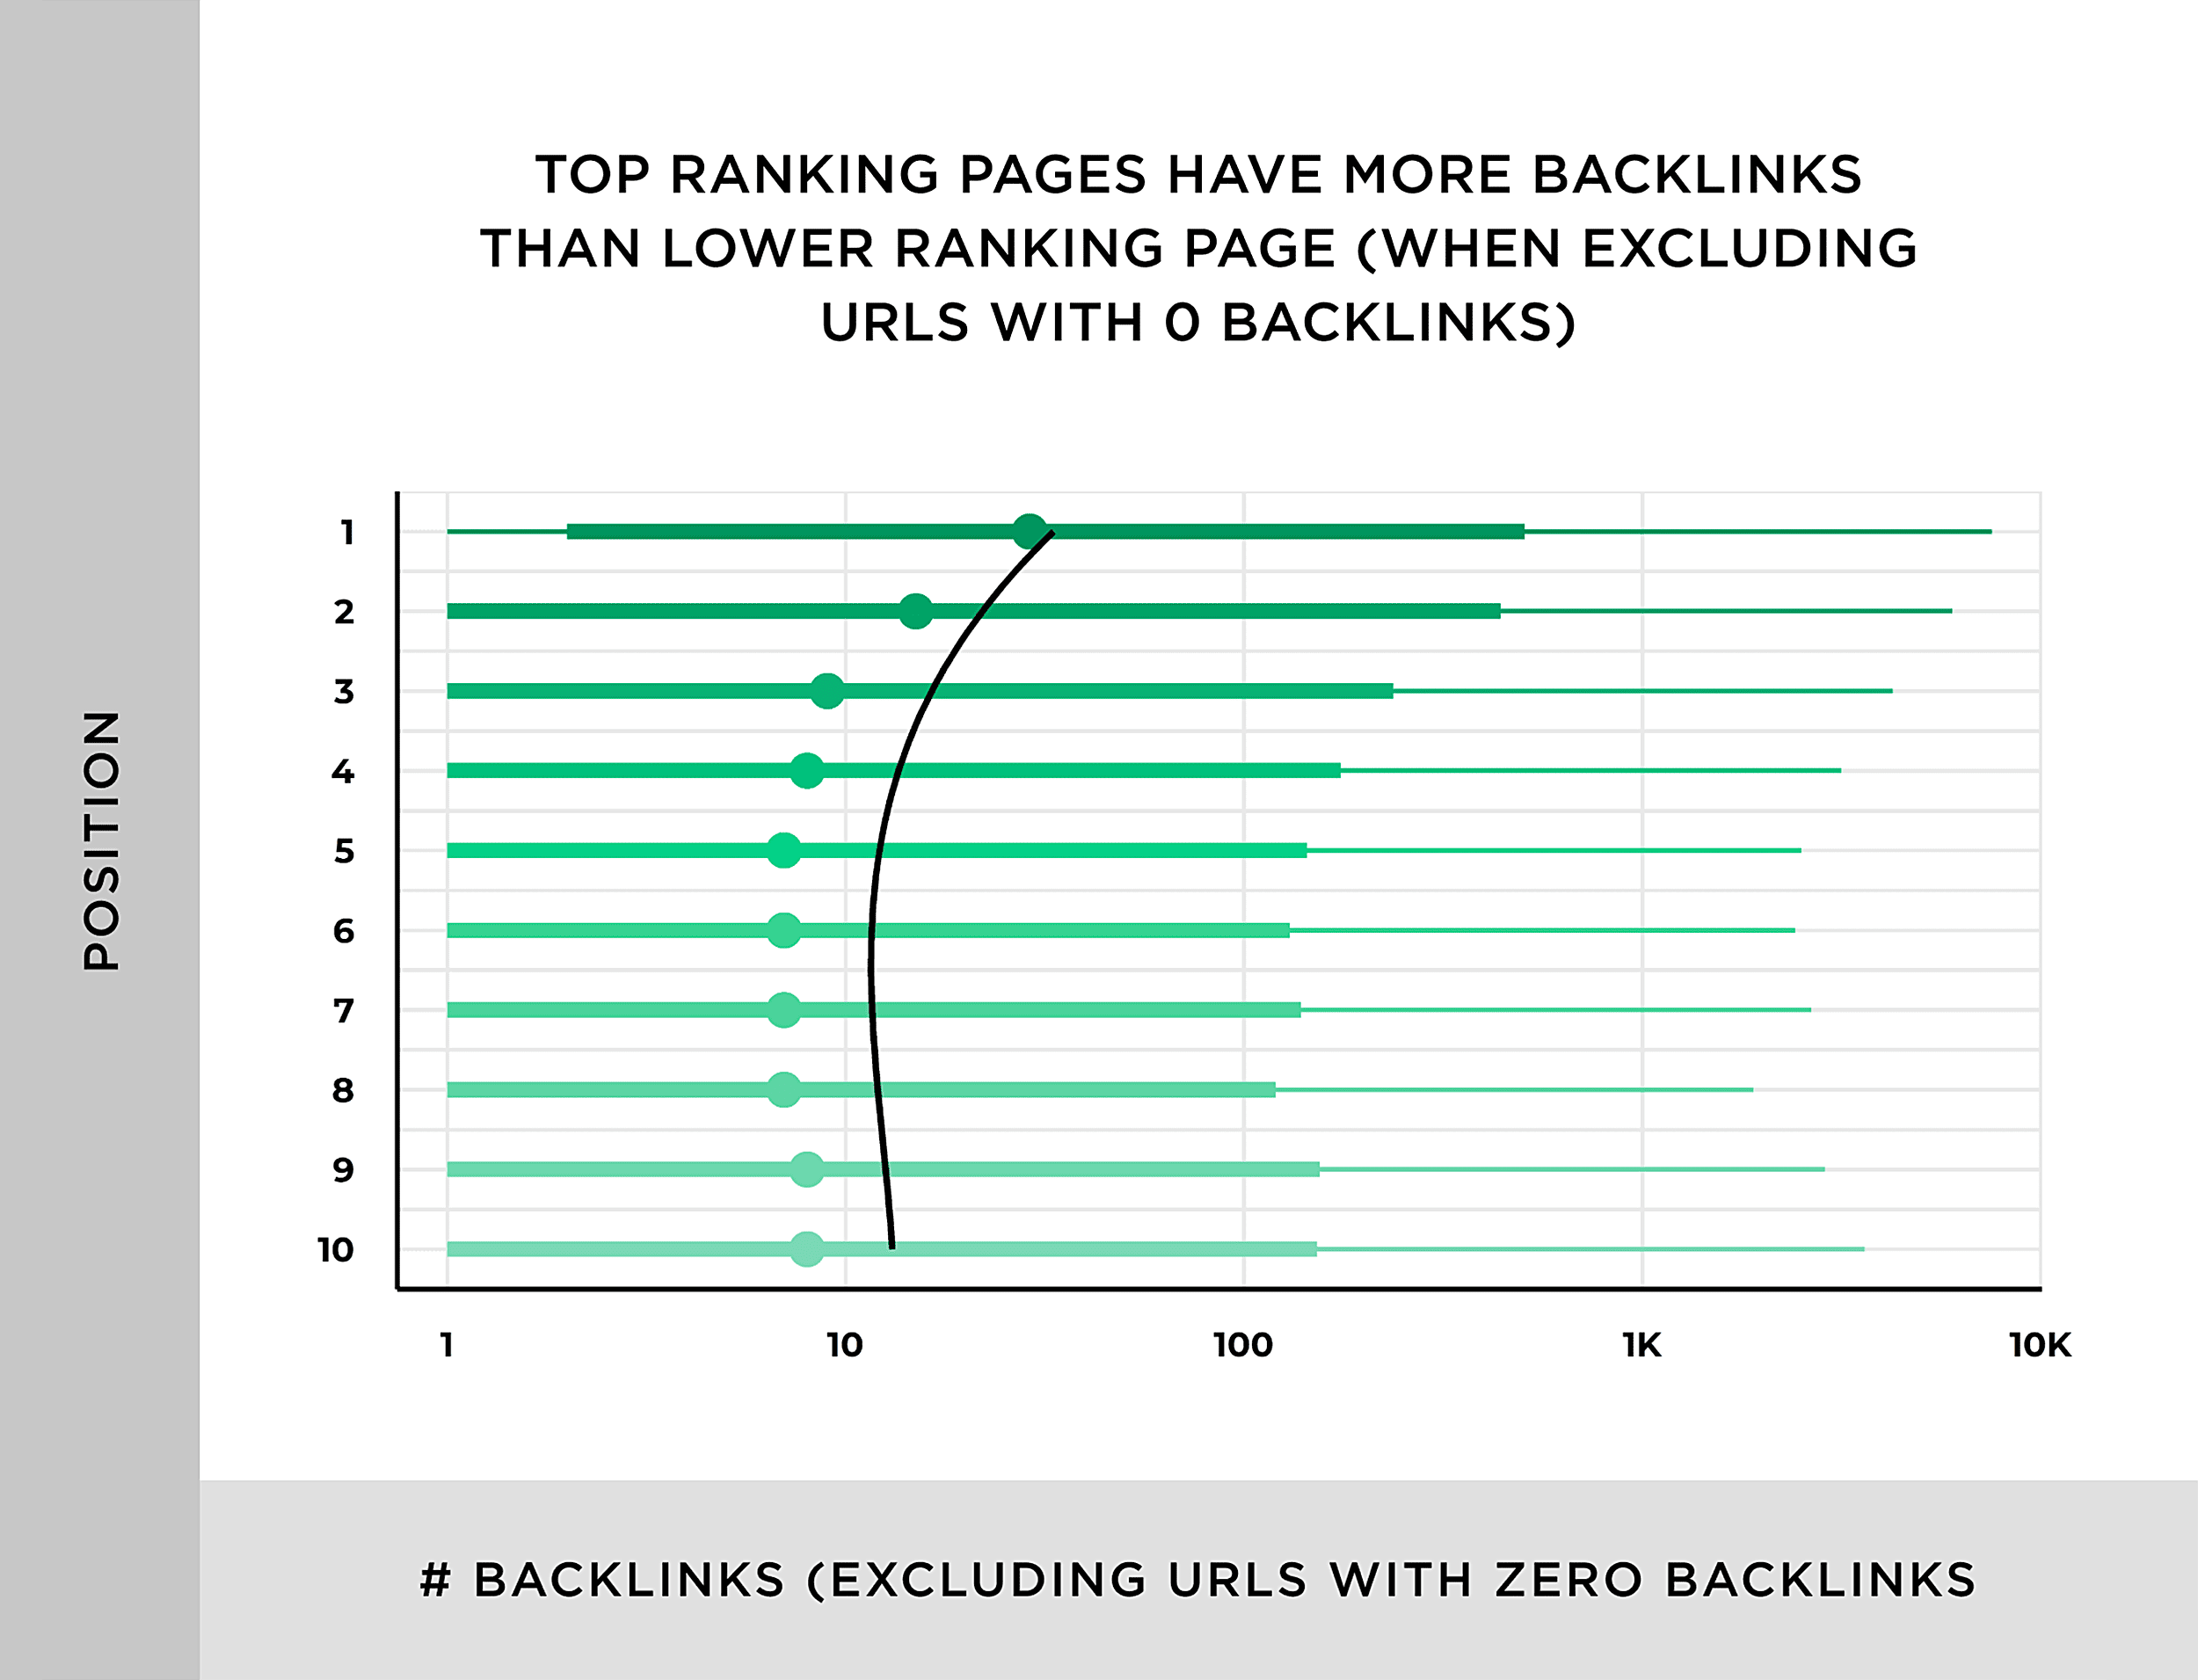 Top ranking pages have more backlinks